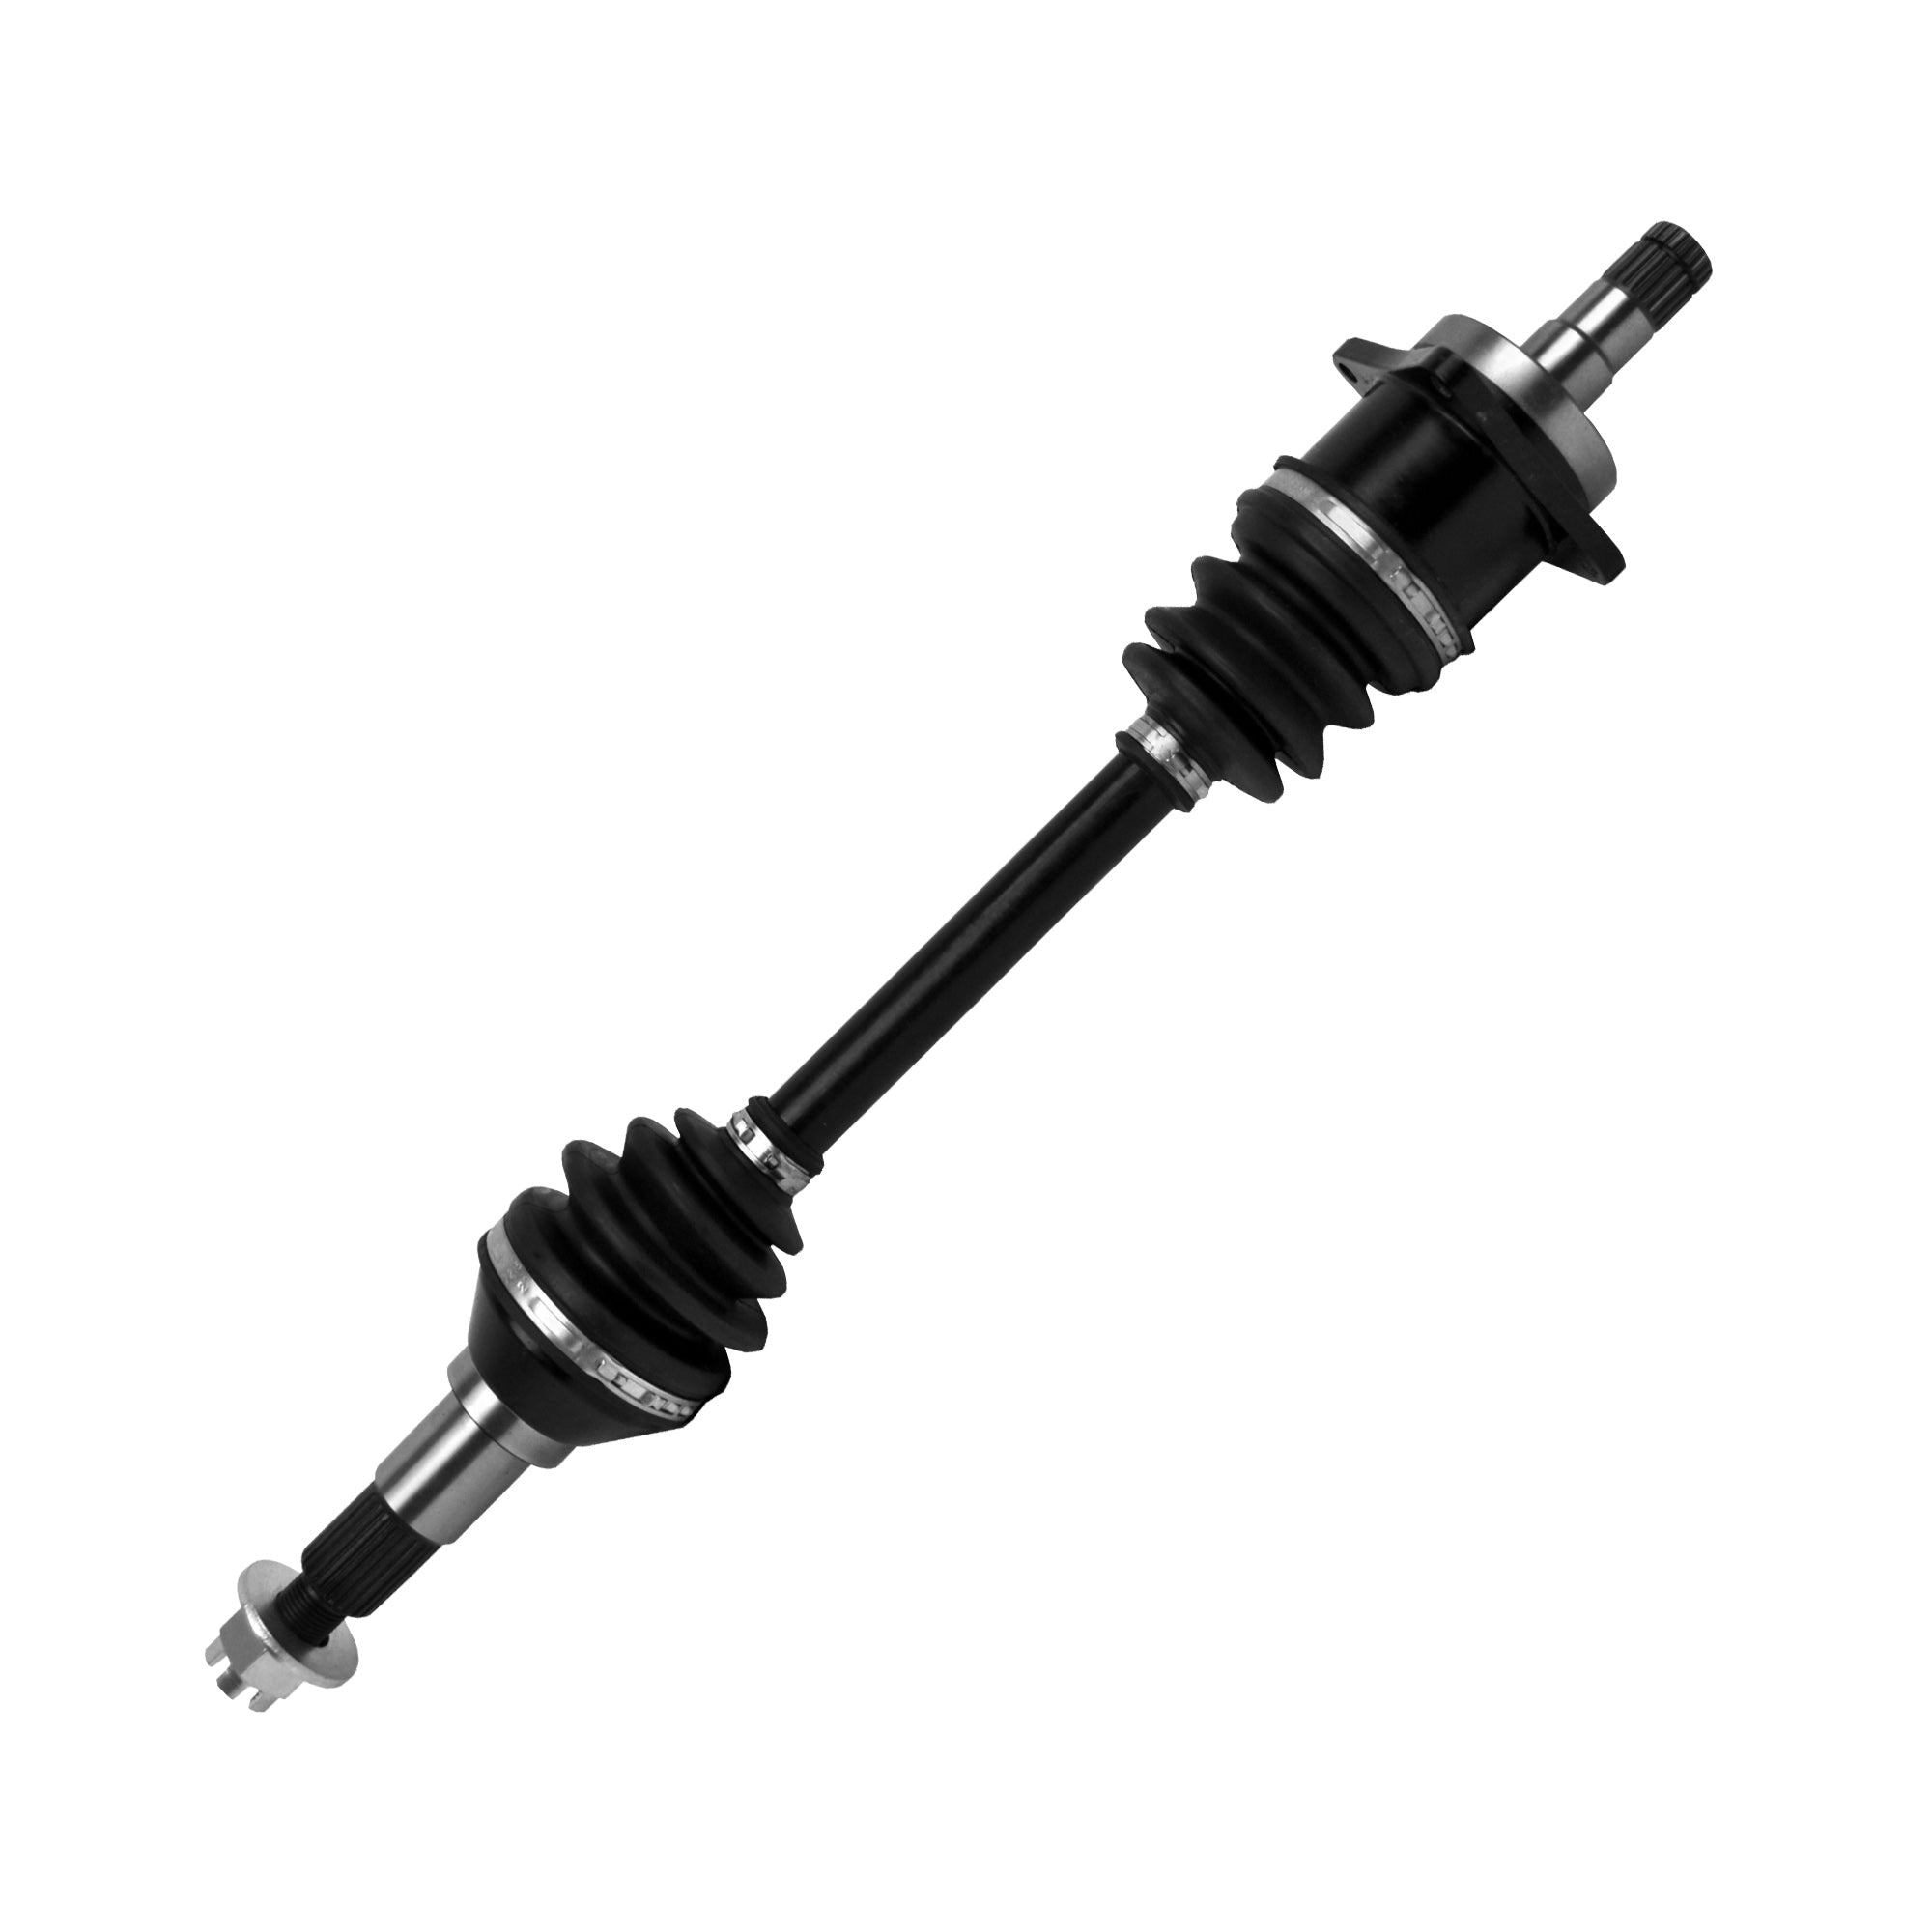 Performance Axle for Can Am Renegade 500 